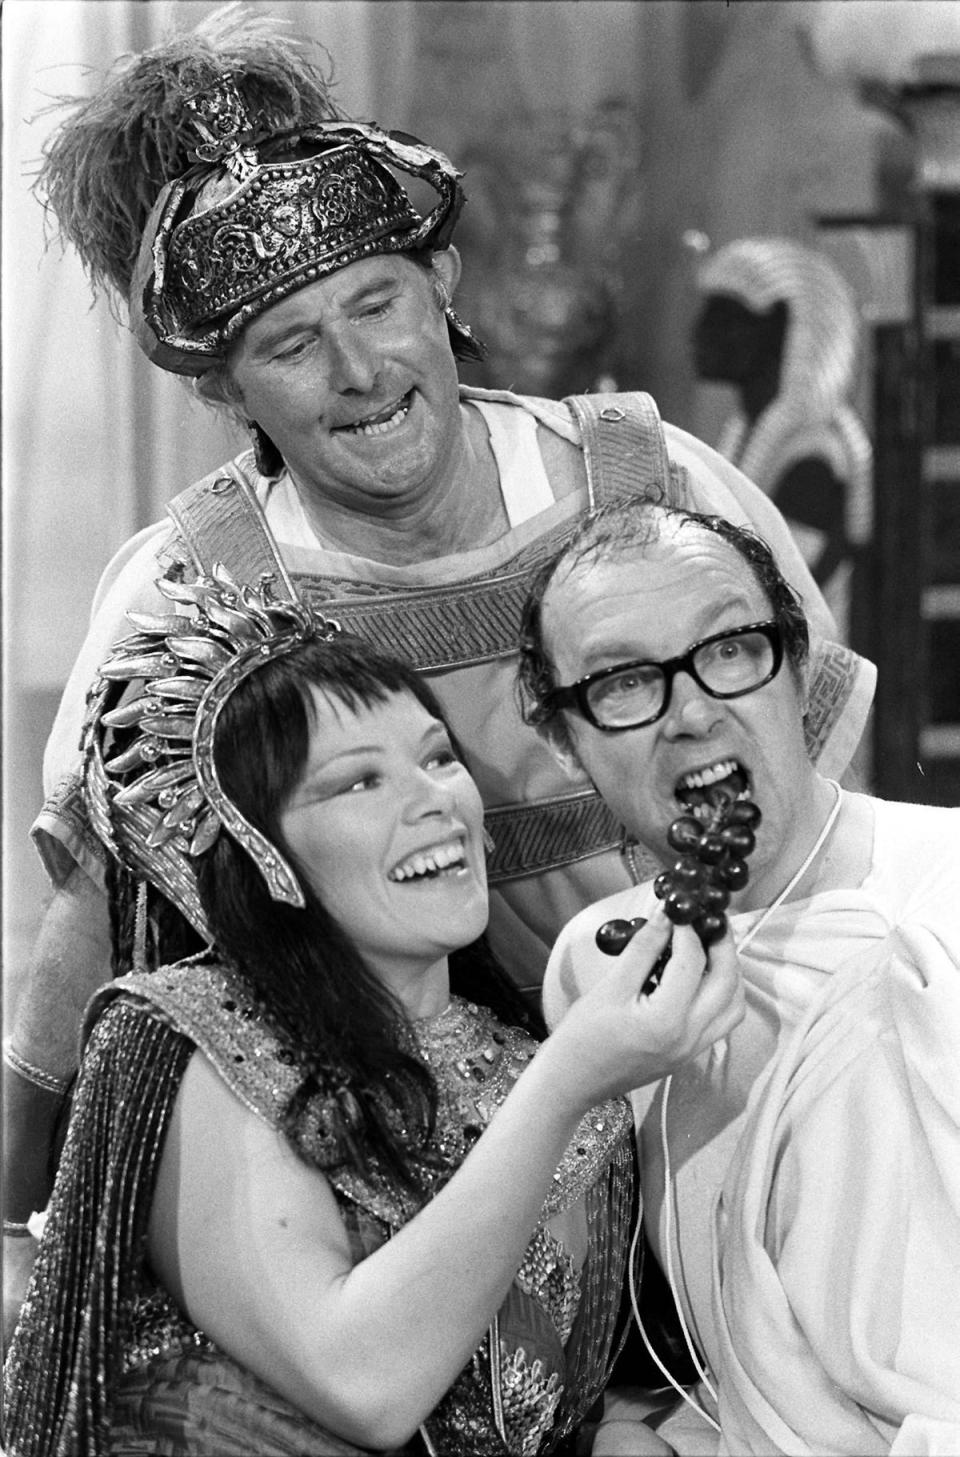 Glenda Jackson plays the role of Cleopatra alongside comedy duo Eric Morecambe (right) and Ernie Wise. (PA)